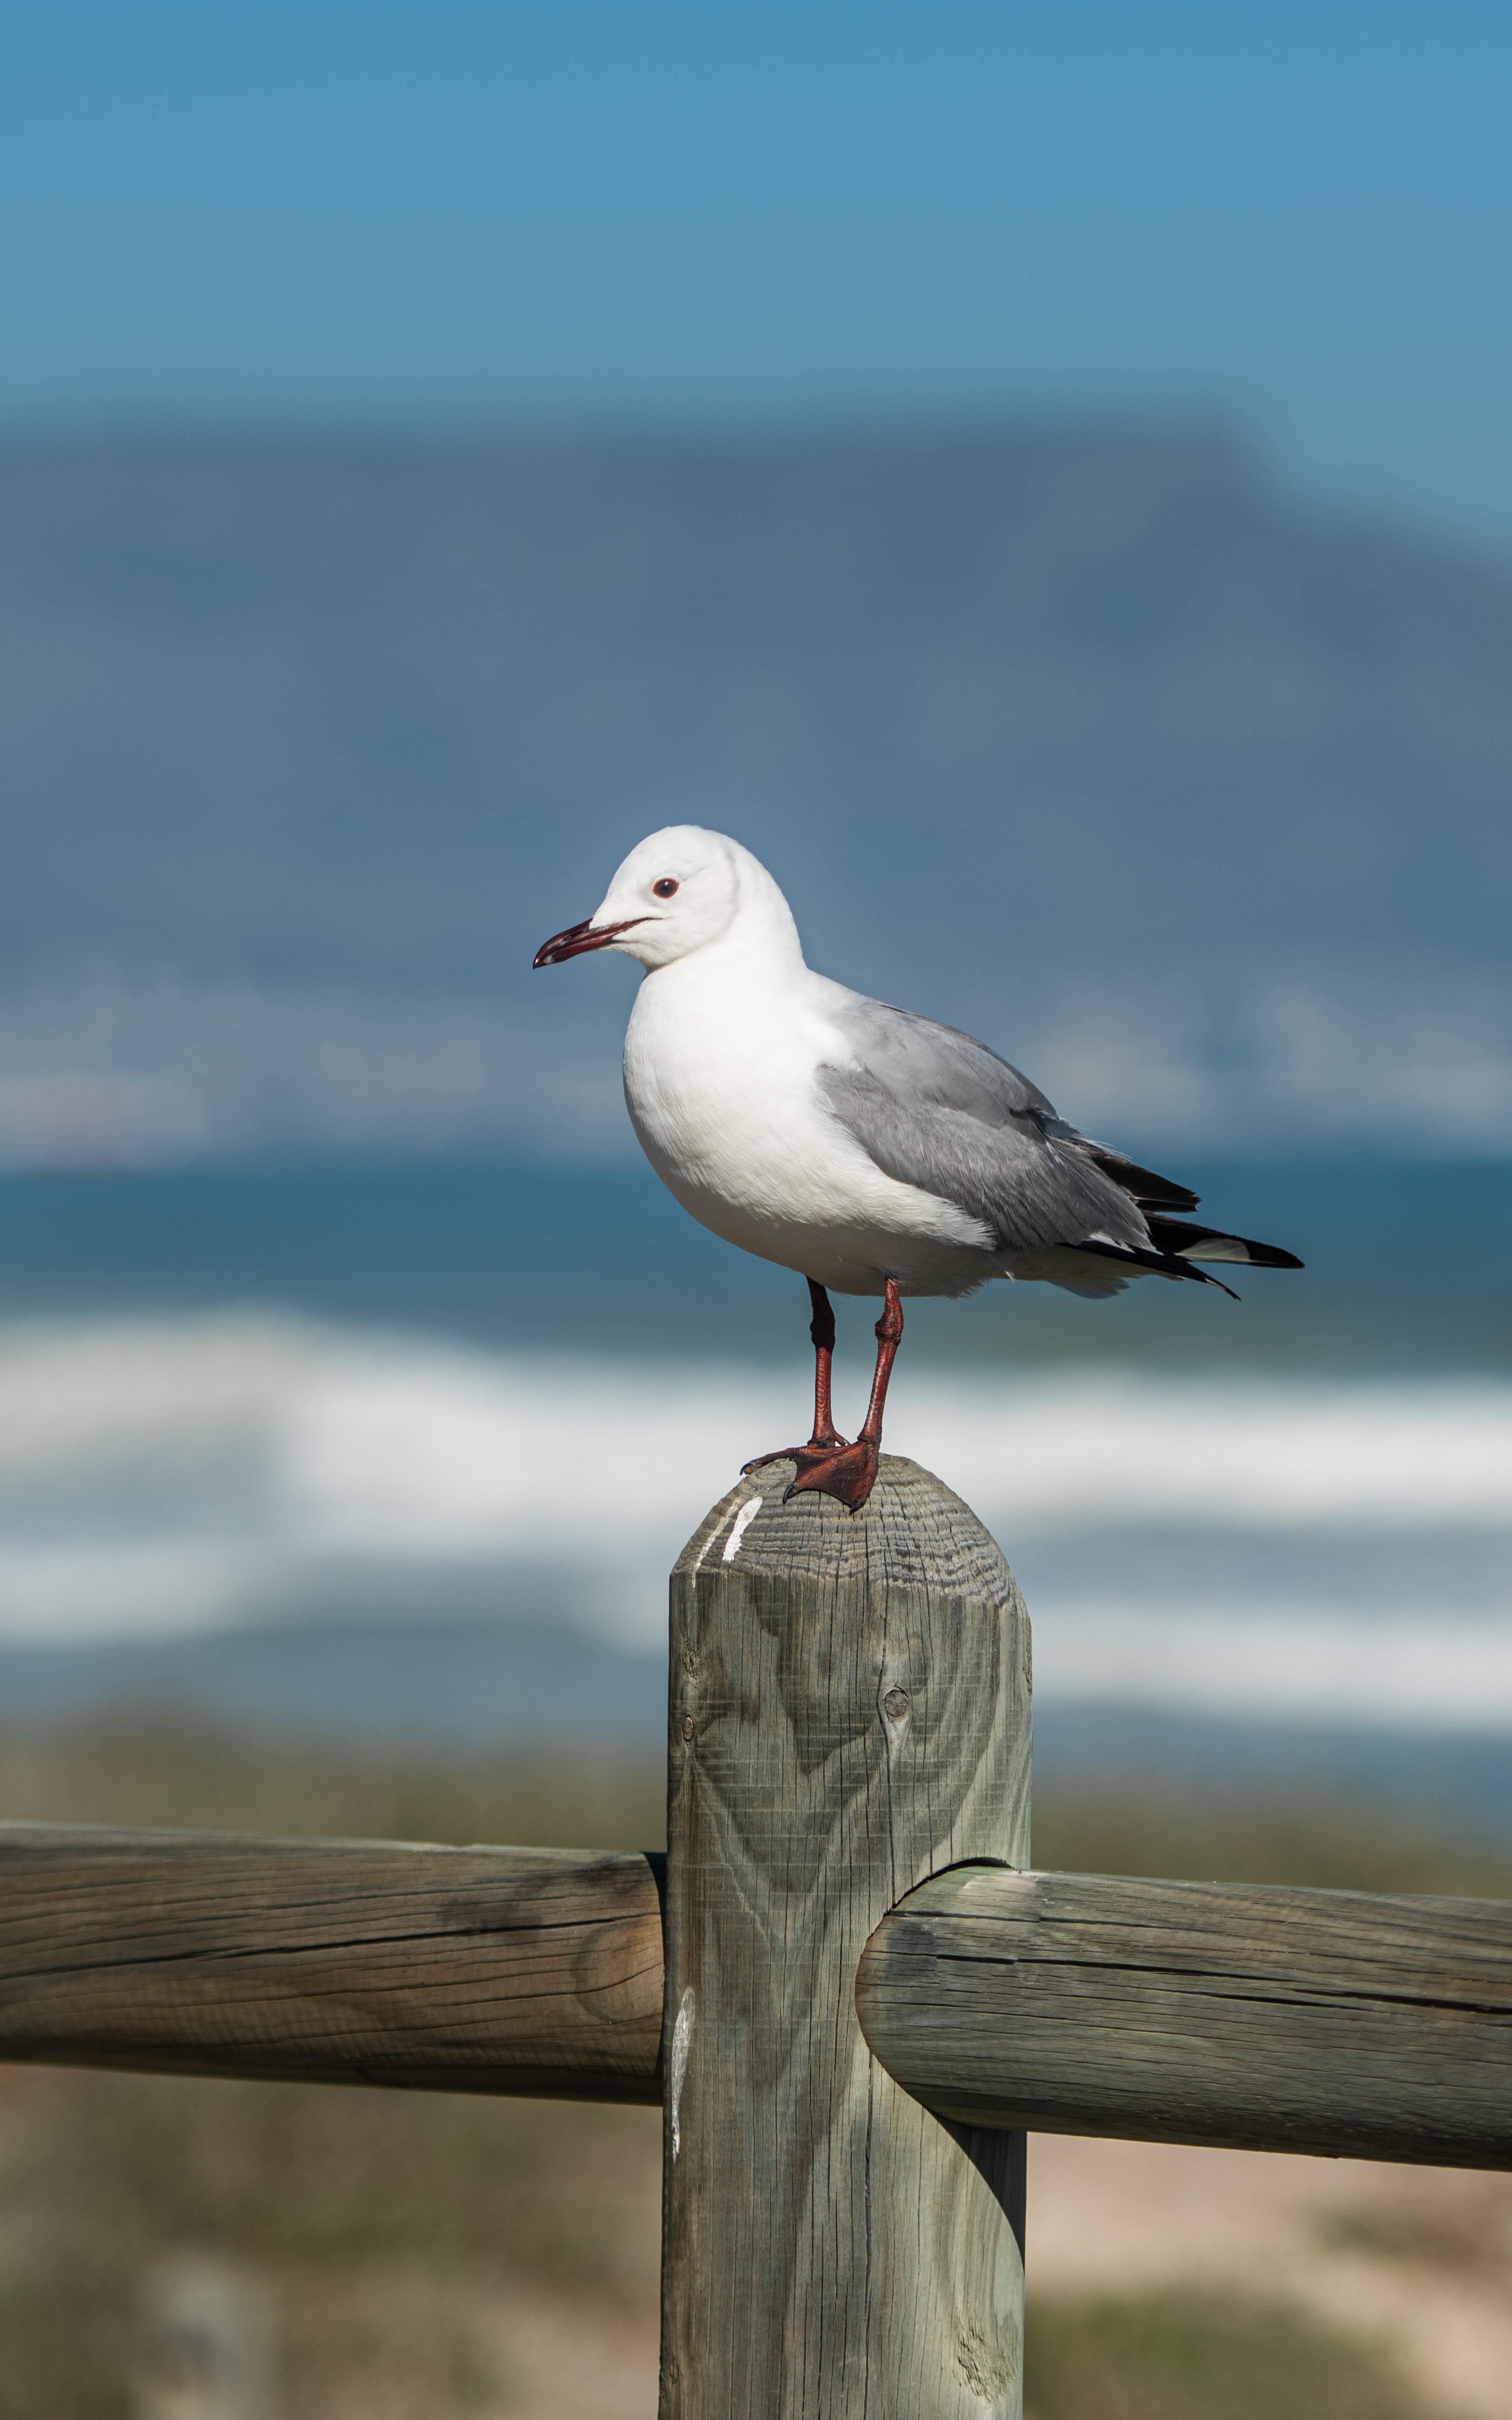 Beautiful News - 3 seagulls standing on wooden fencing